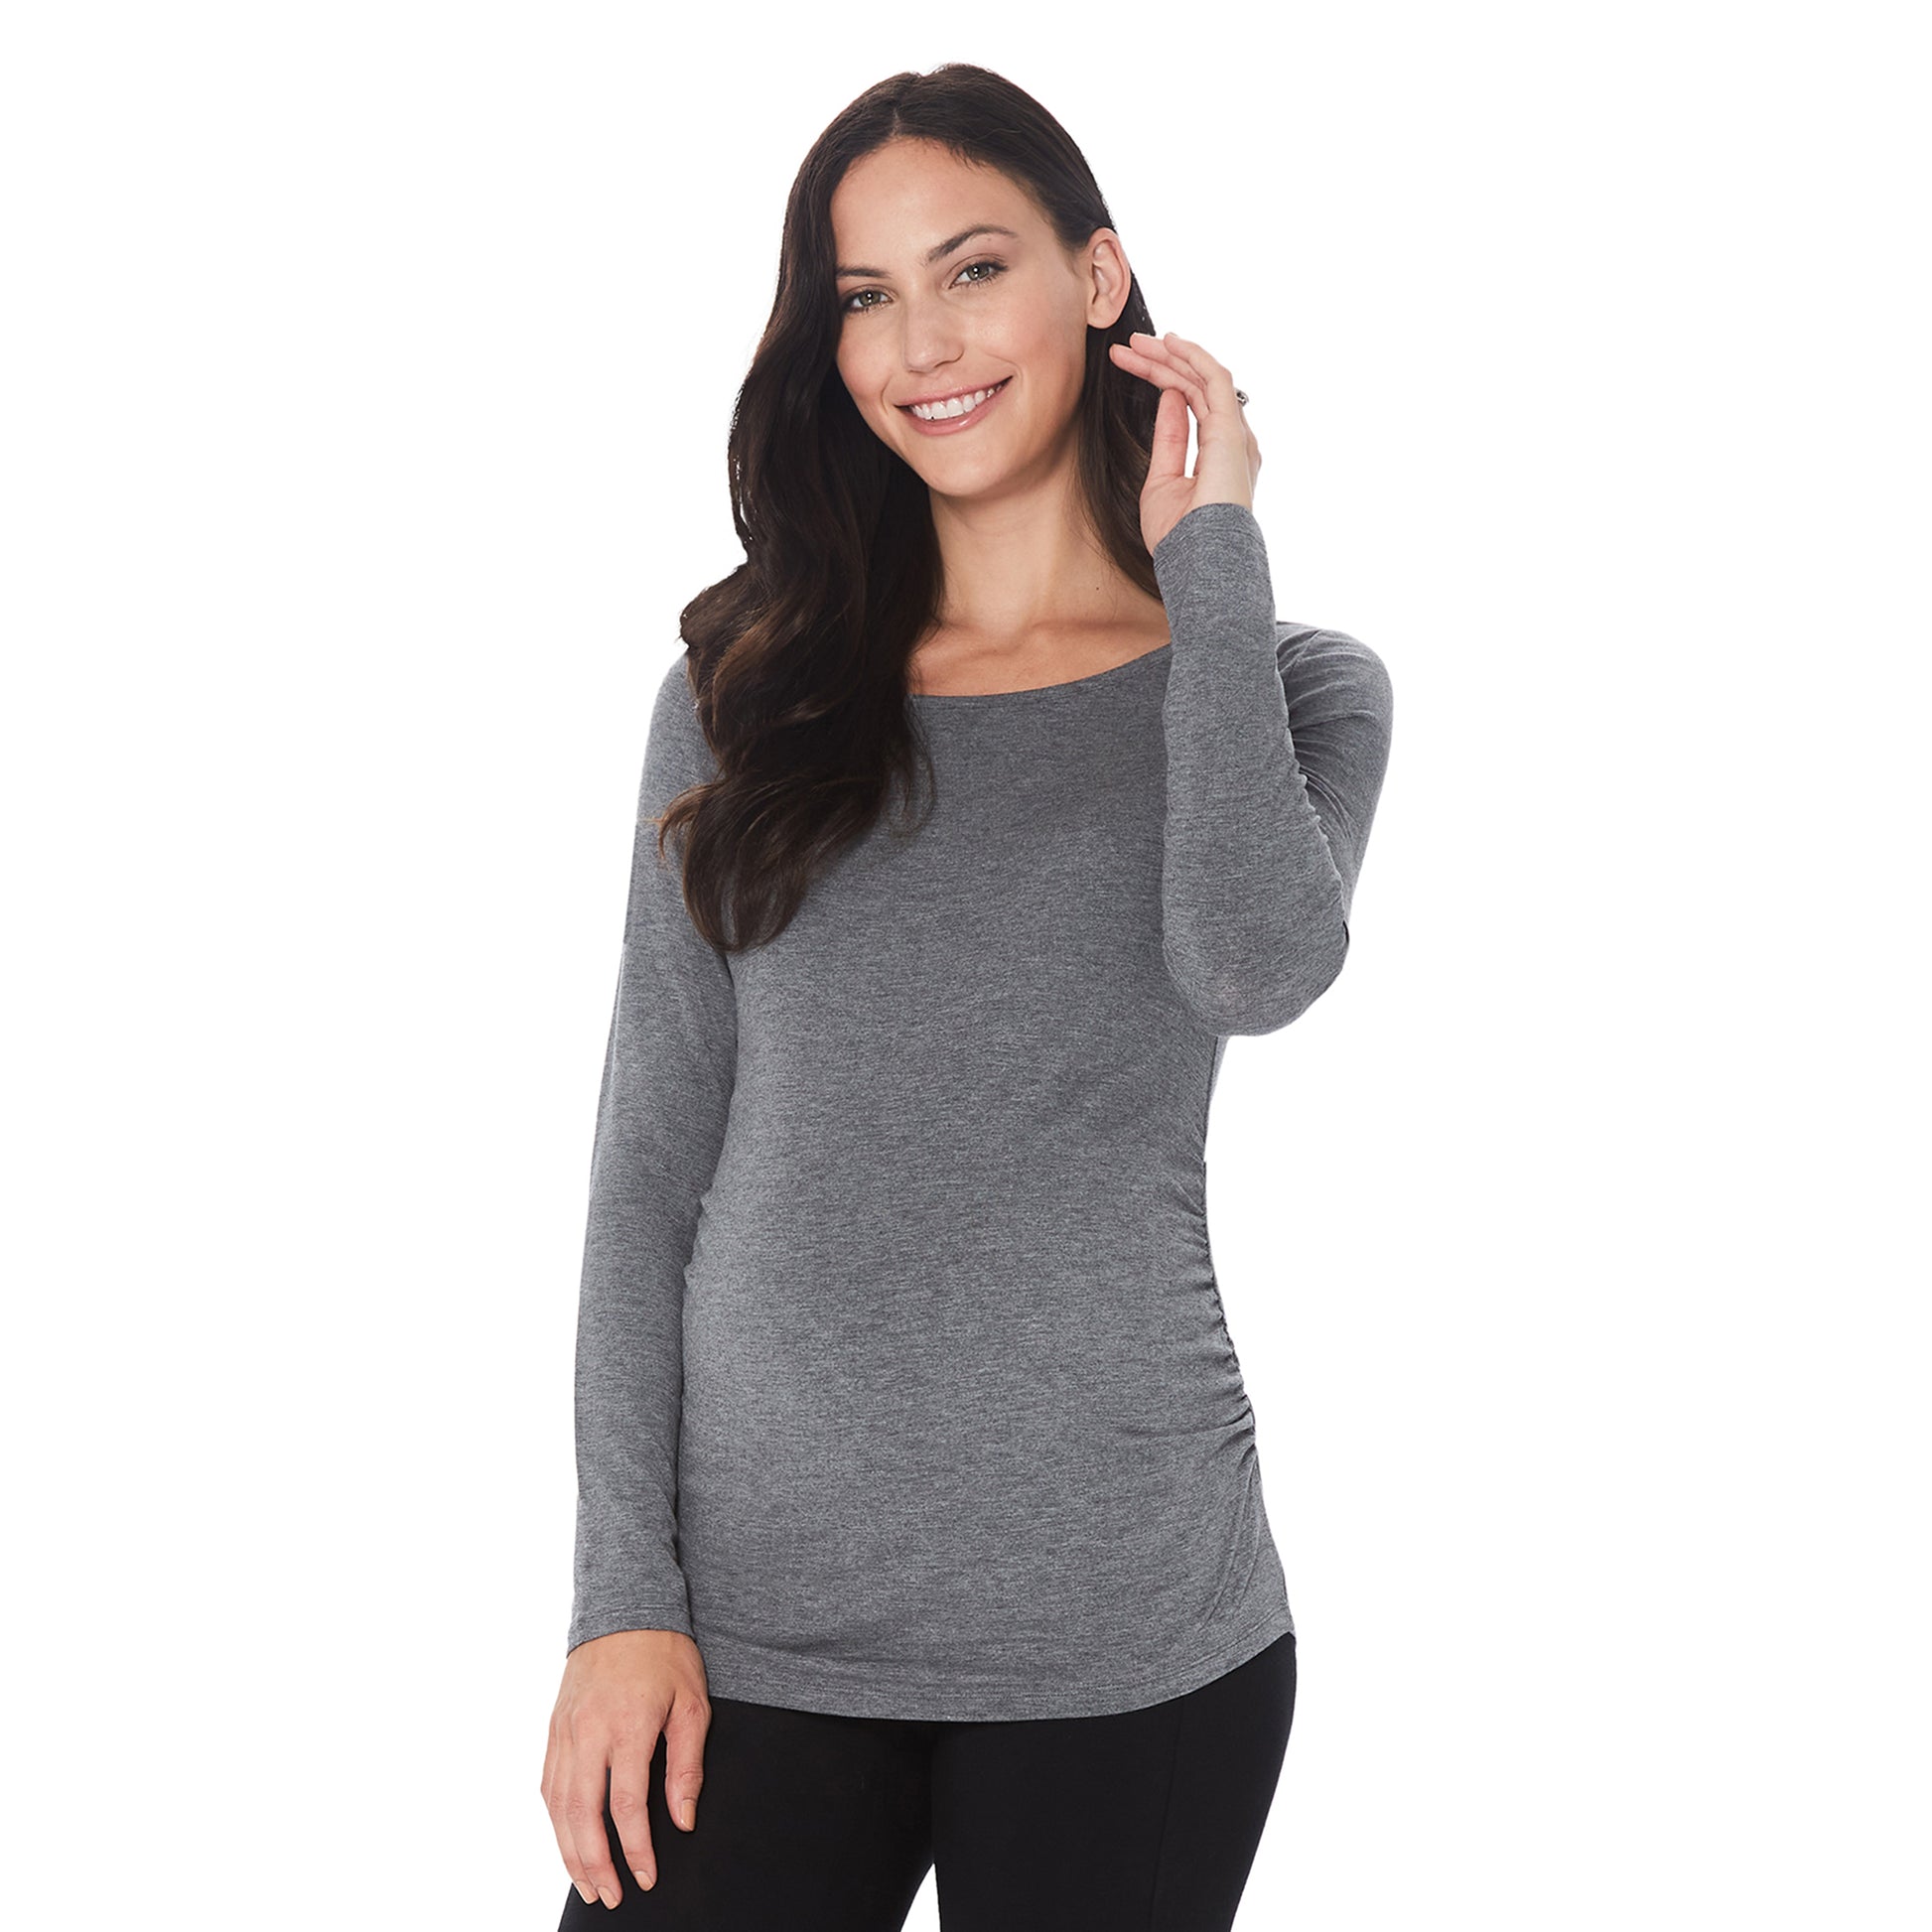 Charcoal Heather; Model is wearing size S. She is 5’11”, Bust 34”, Waist 25”, Hips 36.5”. @A lady wearing a charcoal heather long sleeve maternity ballet neck top. #Model is wearing a maternity bump.